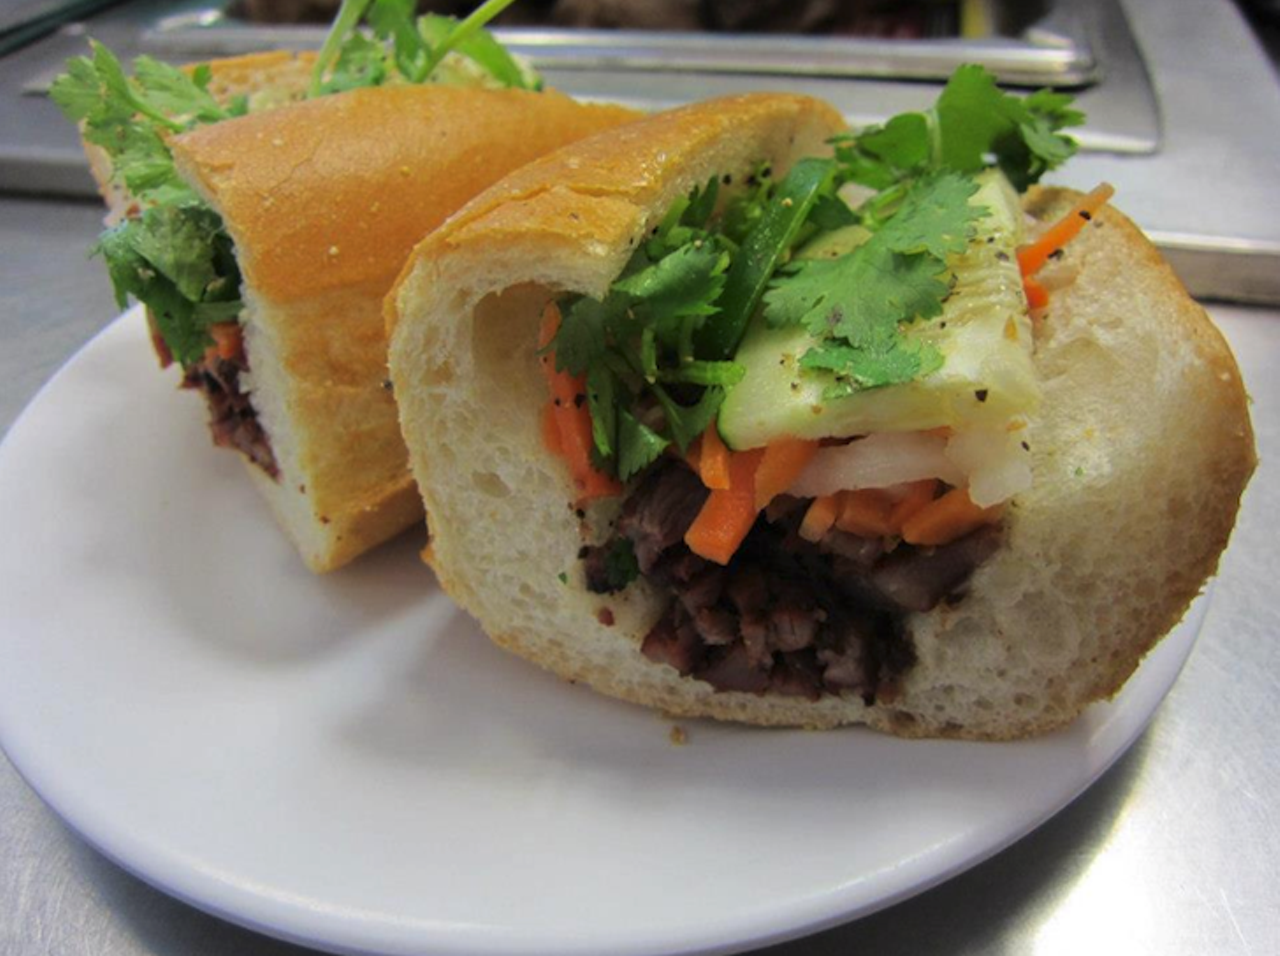 Banh mi at Saigon Deli 
3858 W Waters Ave, Tampa
Cheap, good eats is what Saigon Deli is all about. It&#146;s a safe bet for a chicken liver Banh mi and a steaming hot bowl of pho. Just order at the front and grab a seat for it to be delivered. Look like you&#146;ve done this before.
Photo via Saigon Deli/ Facebook